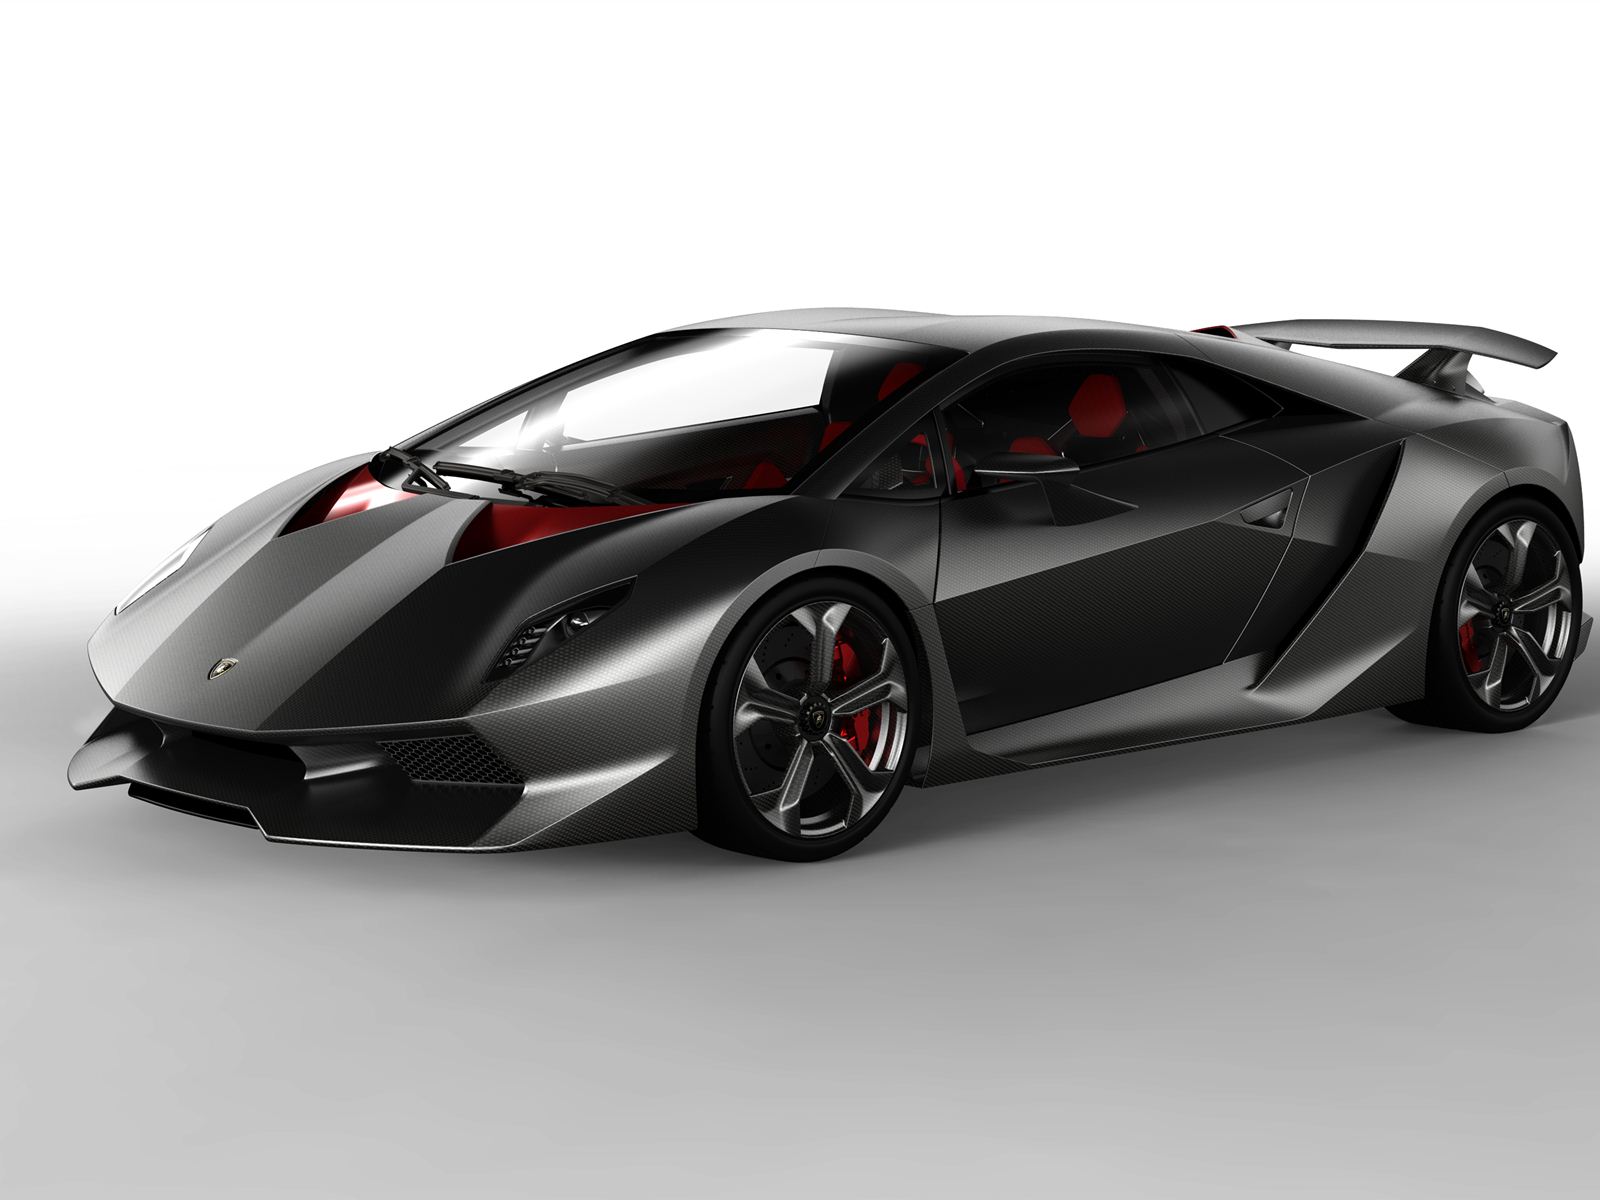 Lamborghini Sesto Elemento is a Coupe with an estimated MSRP of 2,600,000 Top Speed 186 MPH, 0-60 2.4 in Seconds